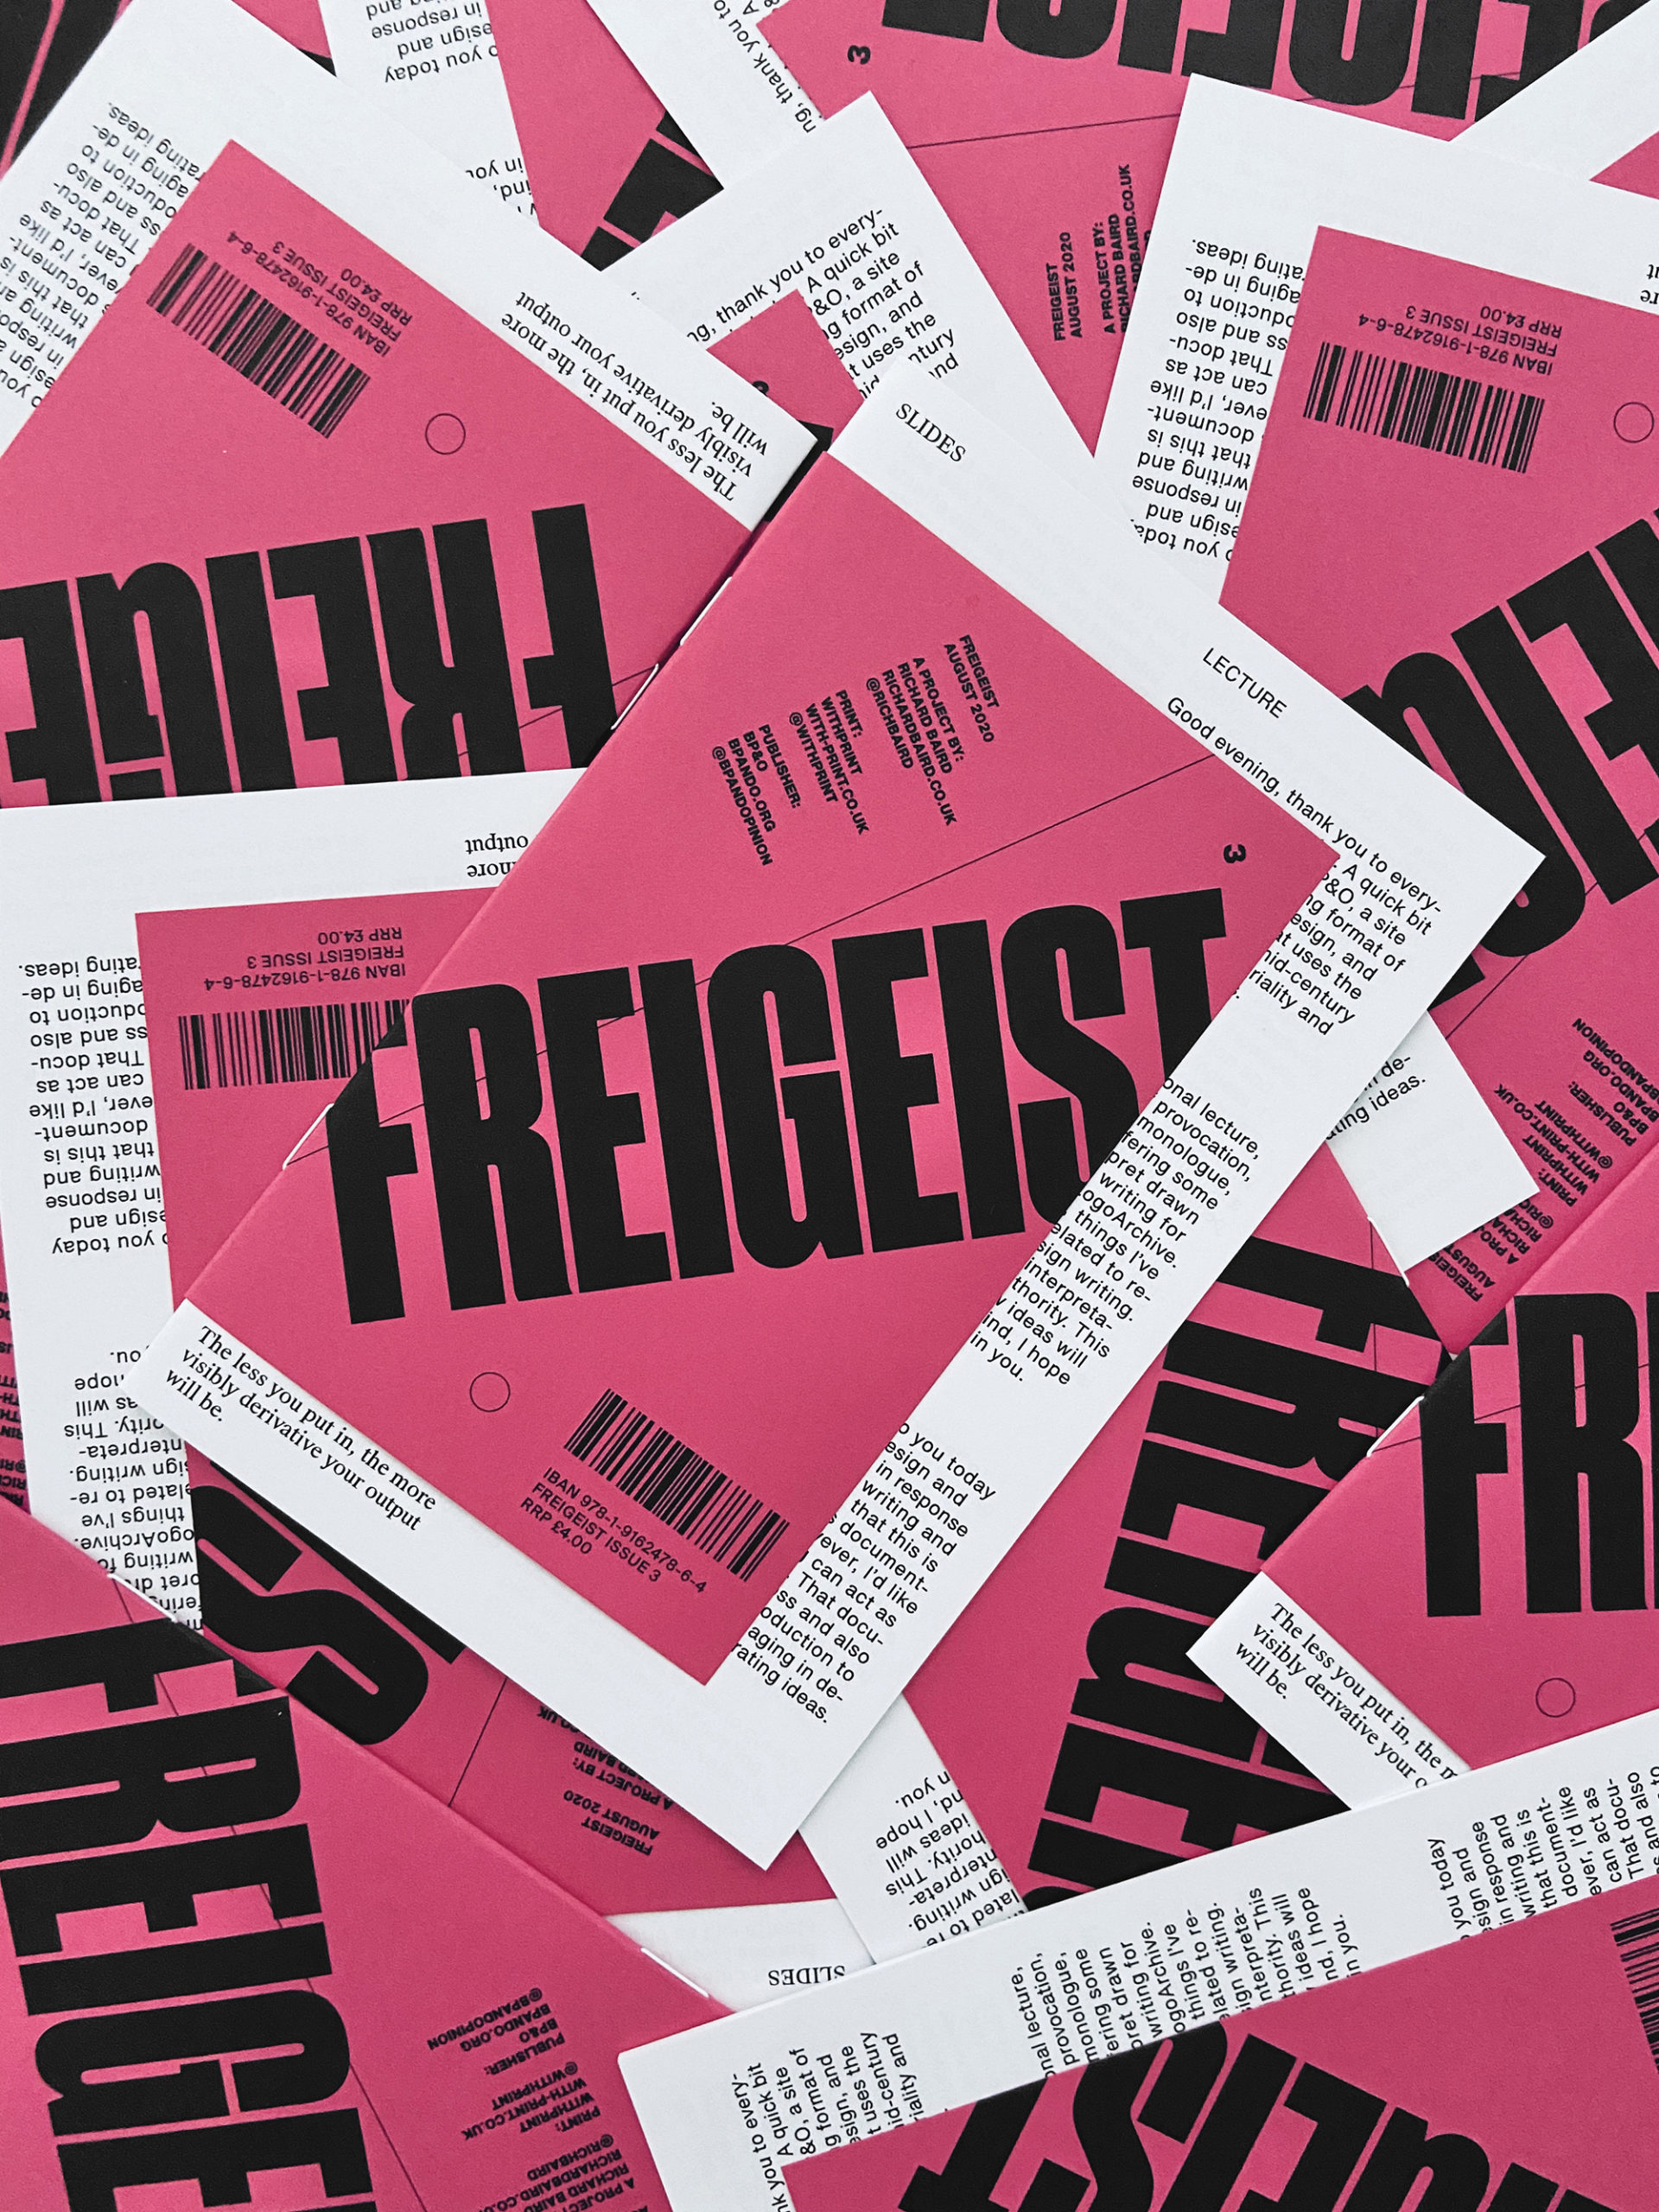 Freigeist Zine Issue 3 designed by Richard Baird, published by BP&O